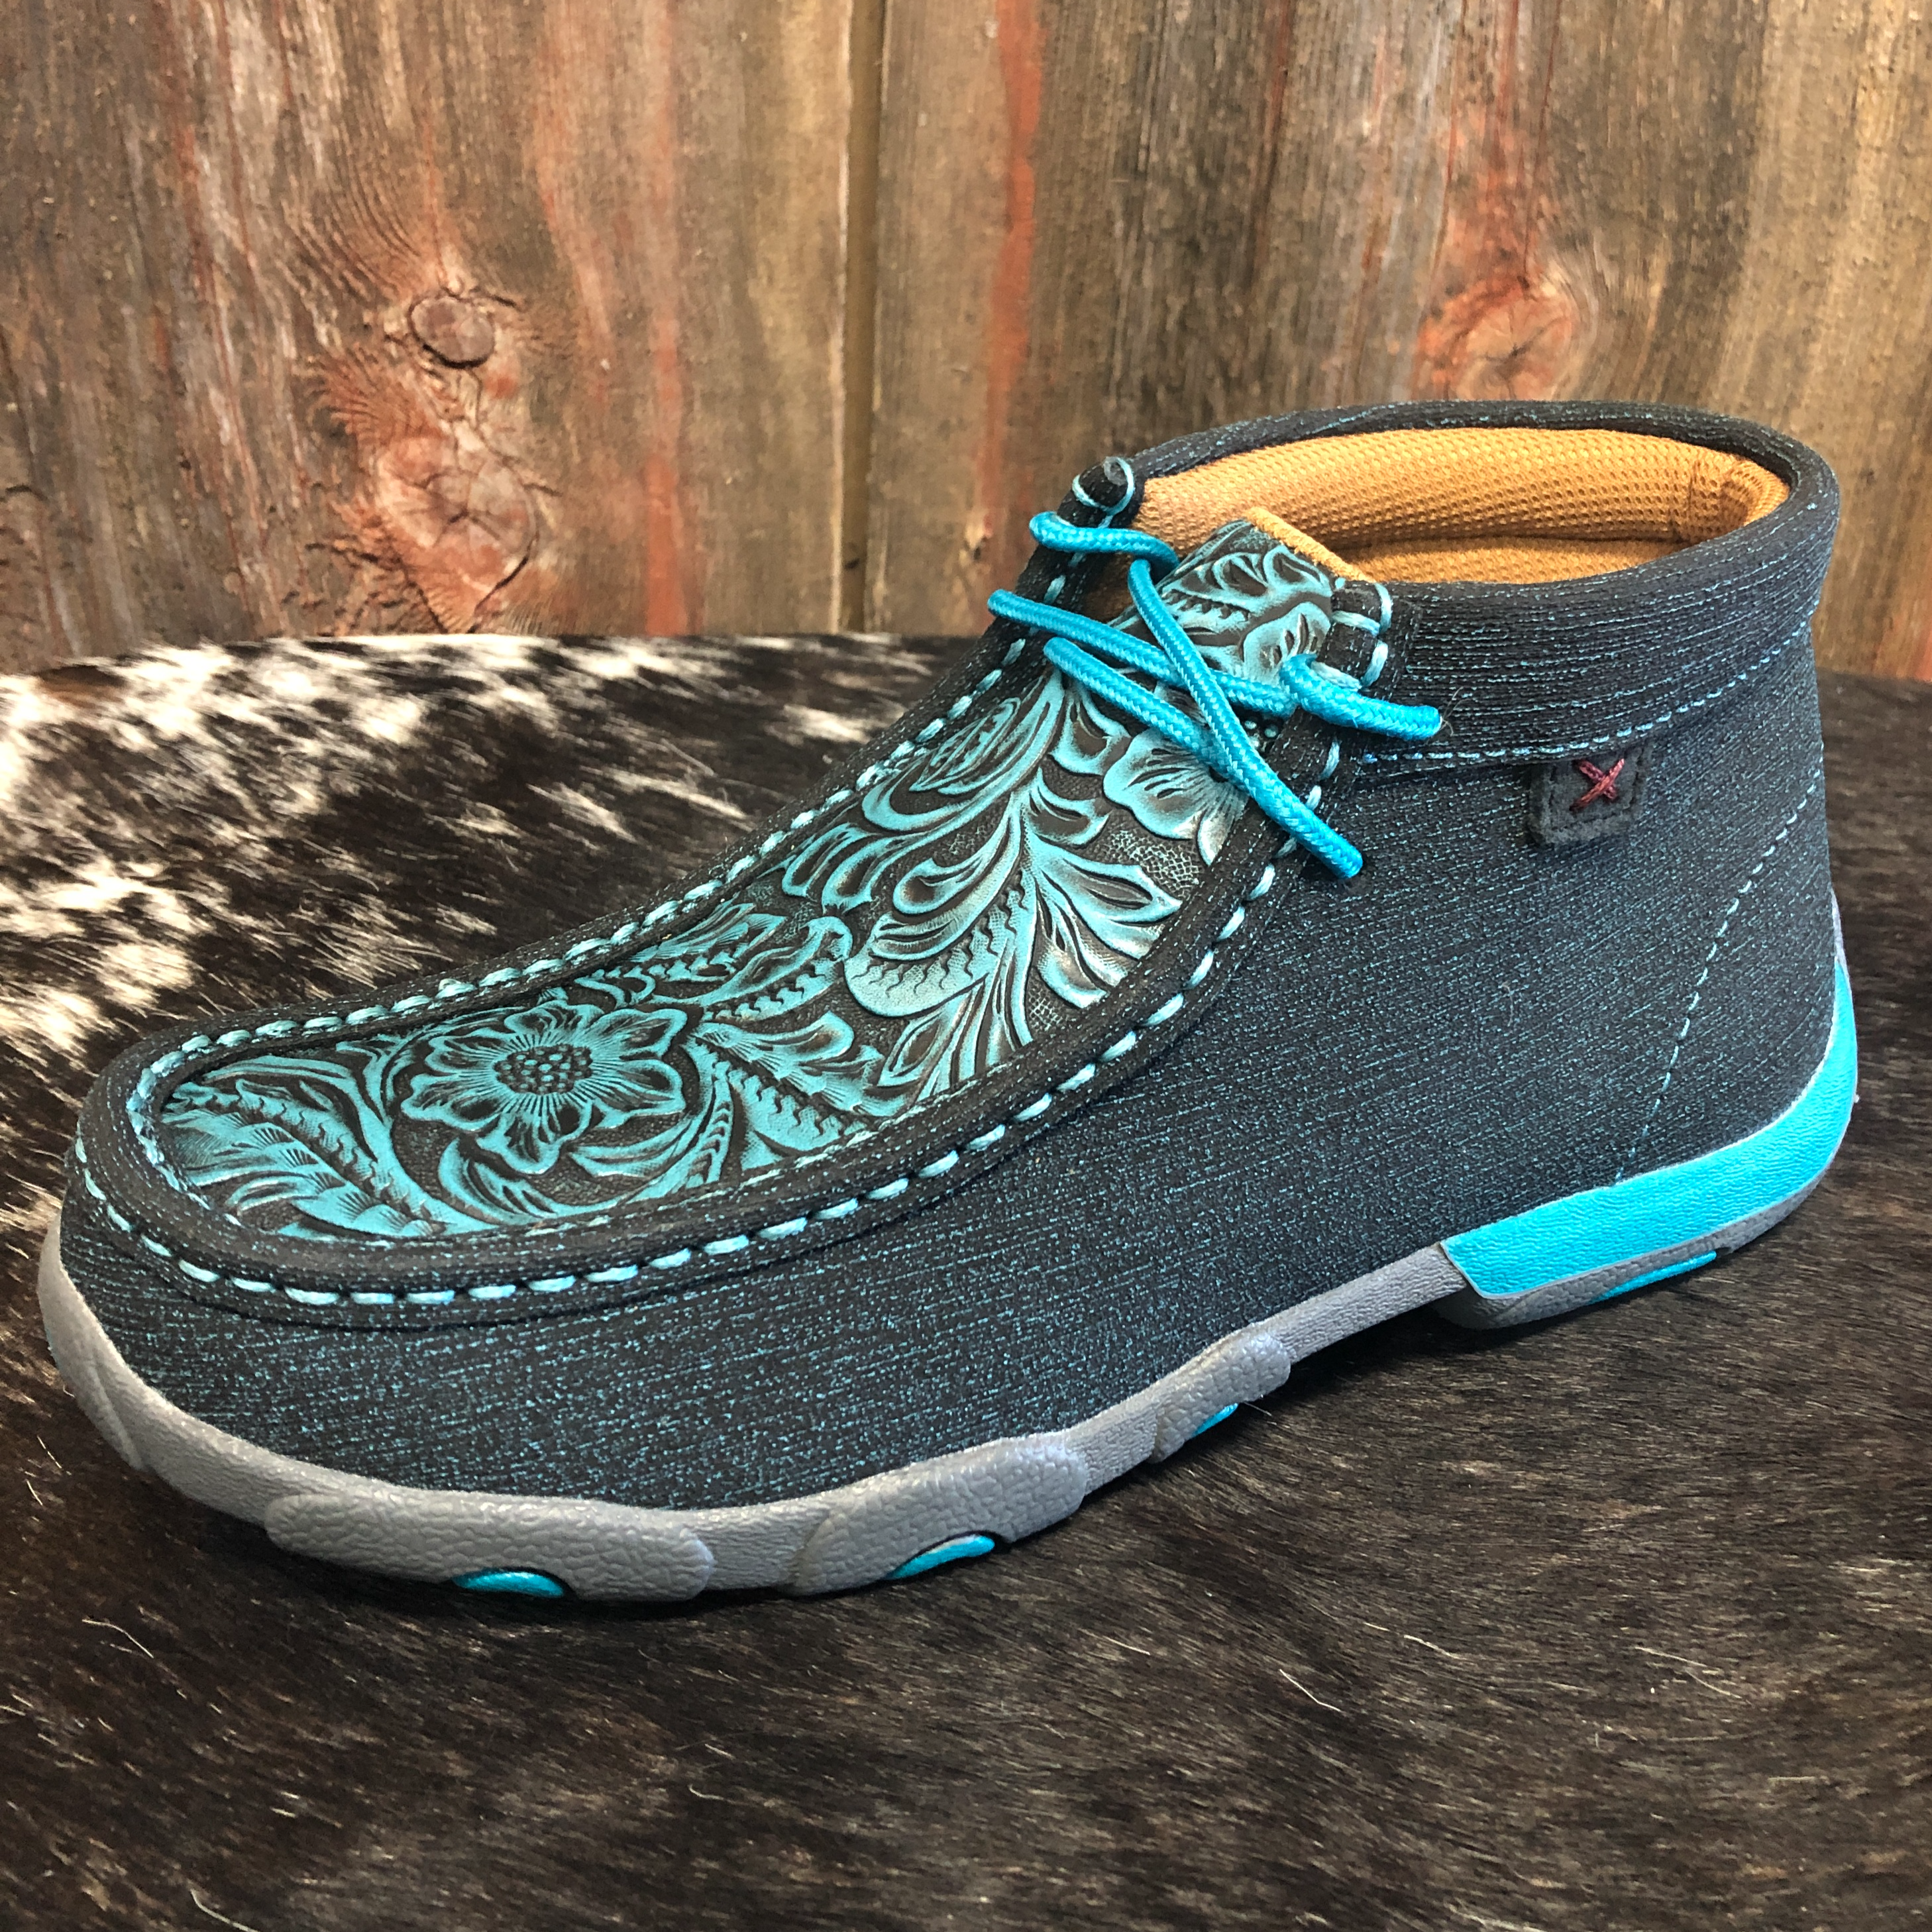 RM Tack EXCLUSIVE Twisted X Women's Dark Teal/Teal Chukka Driving Moc Shoes